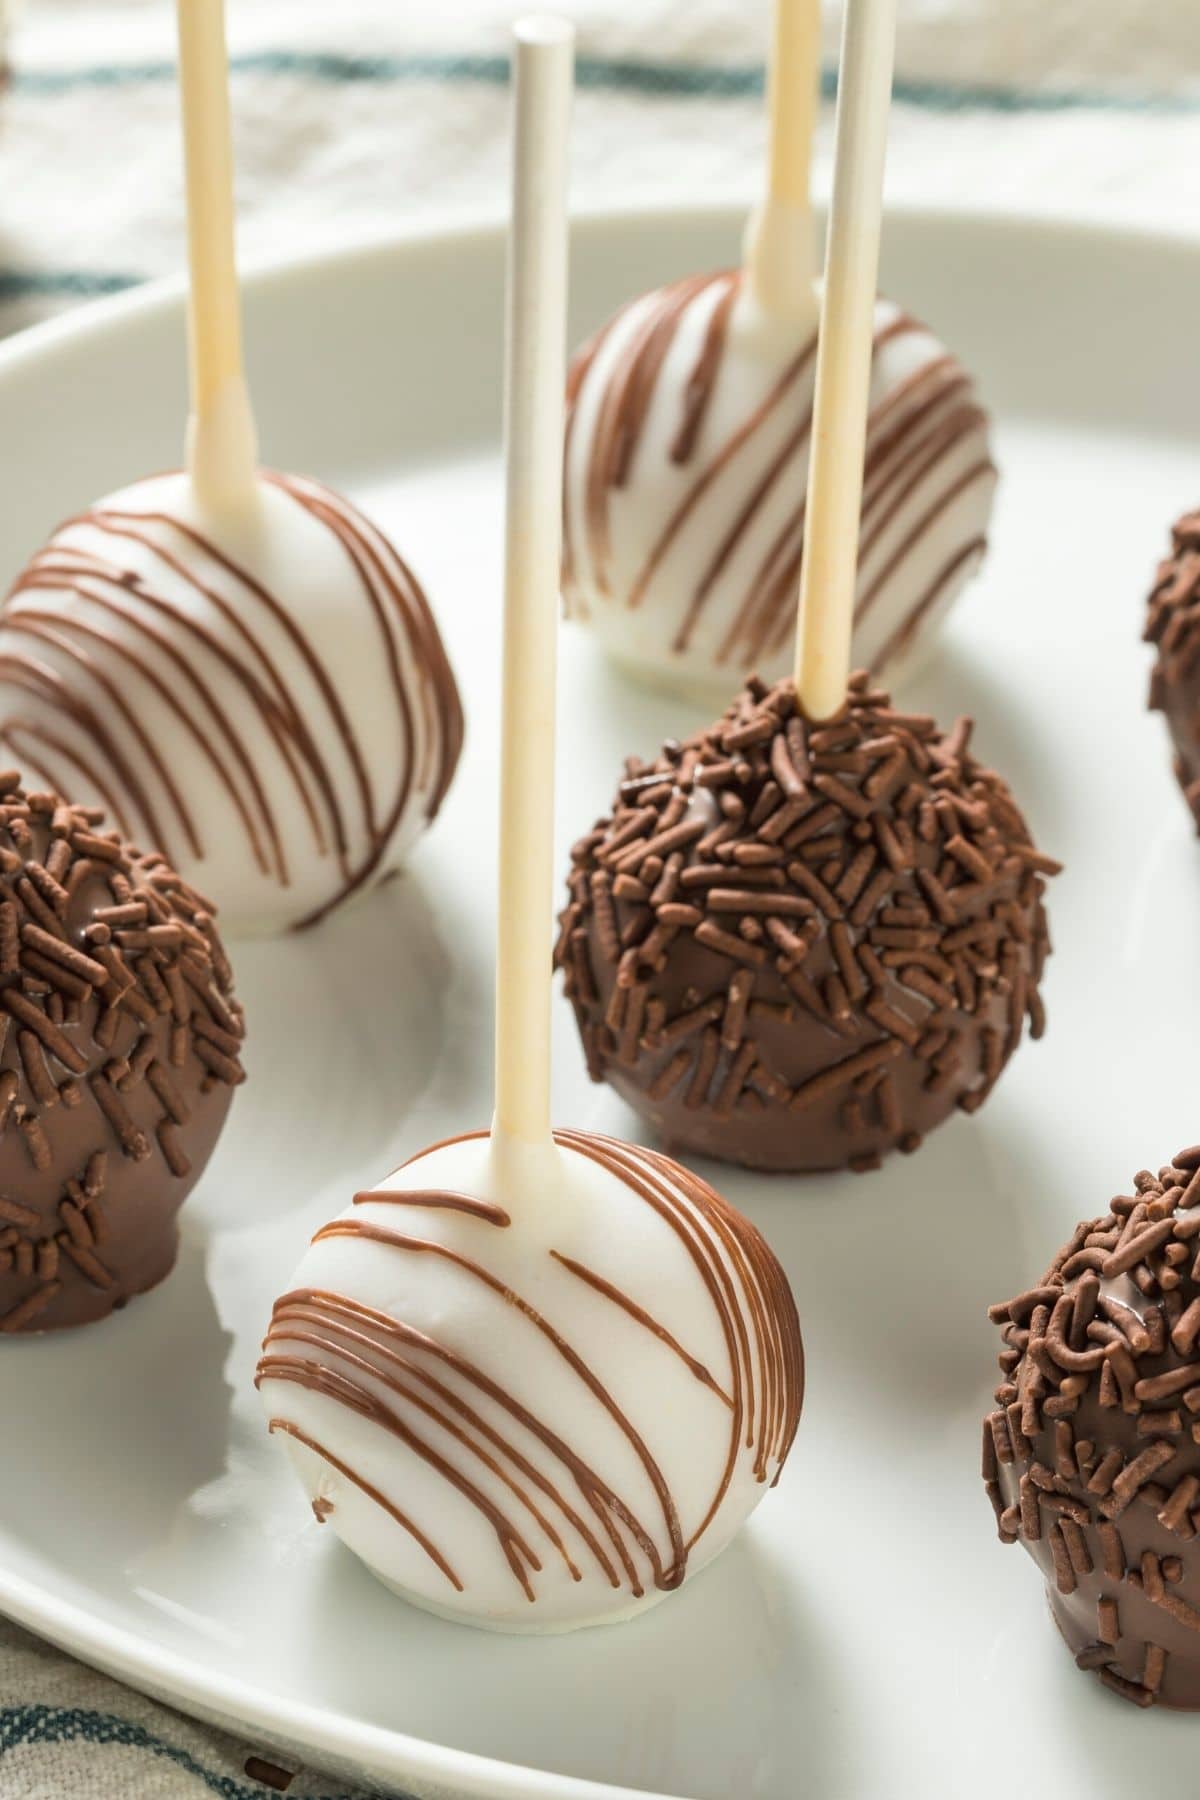 A plate with white chocolate and milk chocolate coated cake pops.